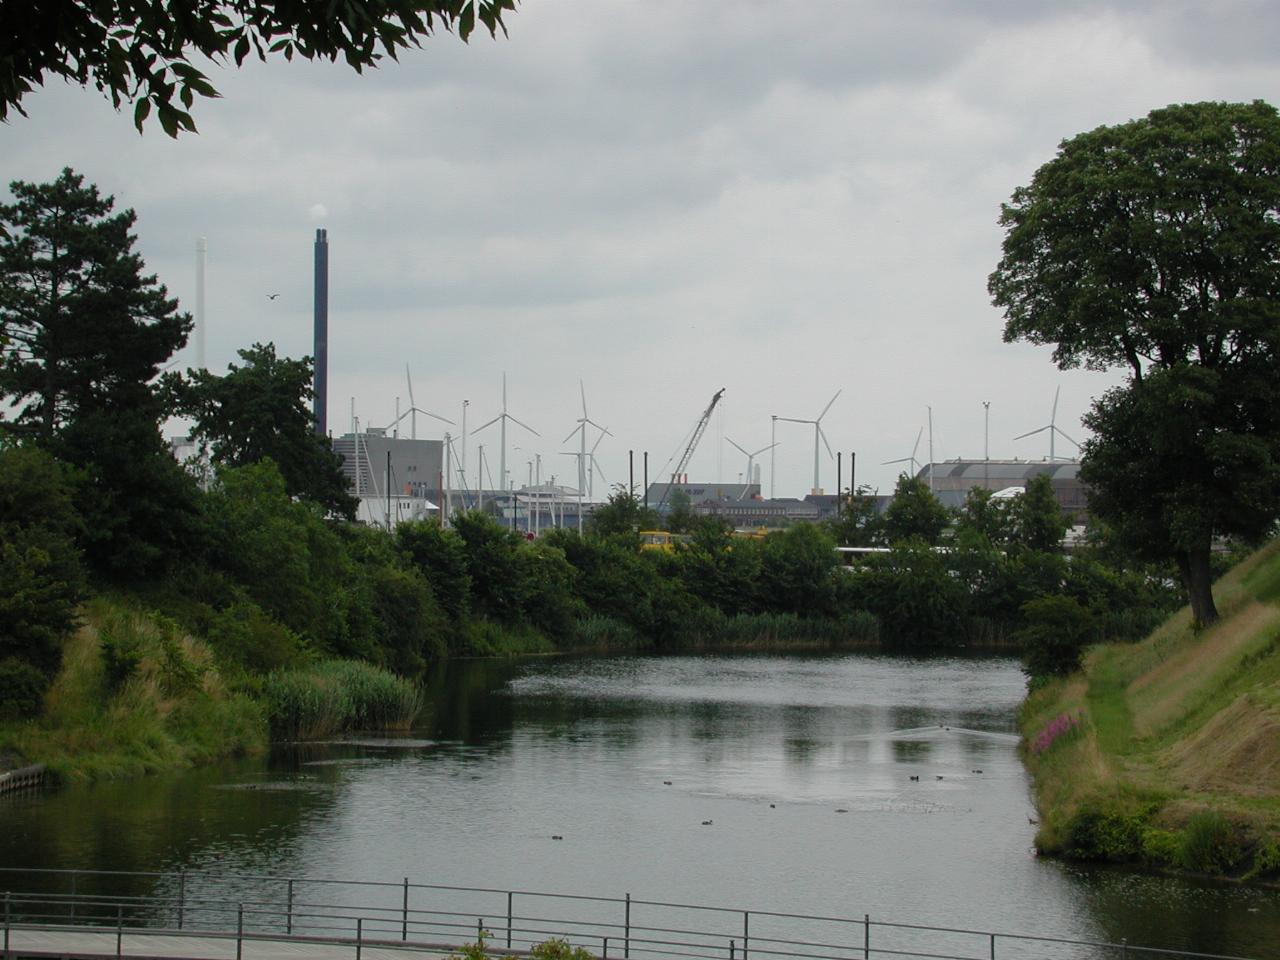 KPLU Viking Jazz: View from ramparts of the Kastellet,  looking towards the industrial area and power generators across the outer harbour